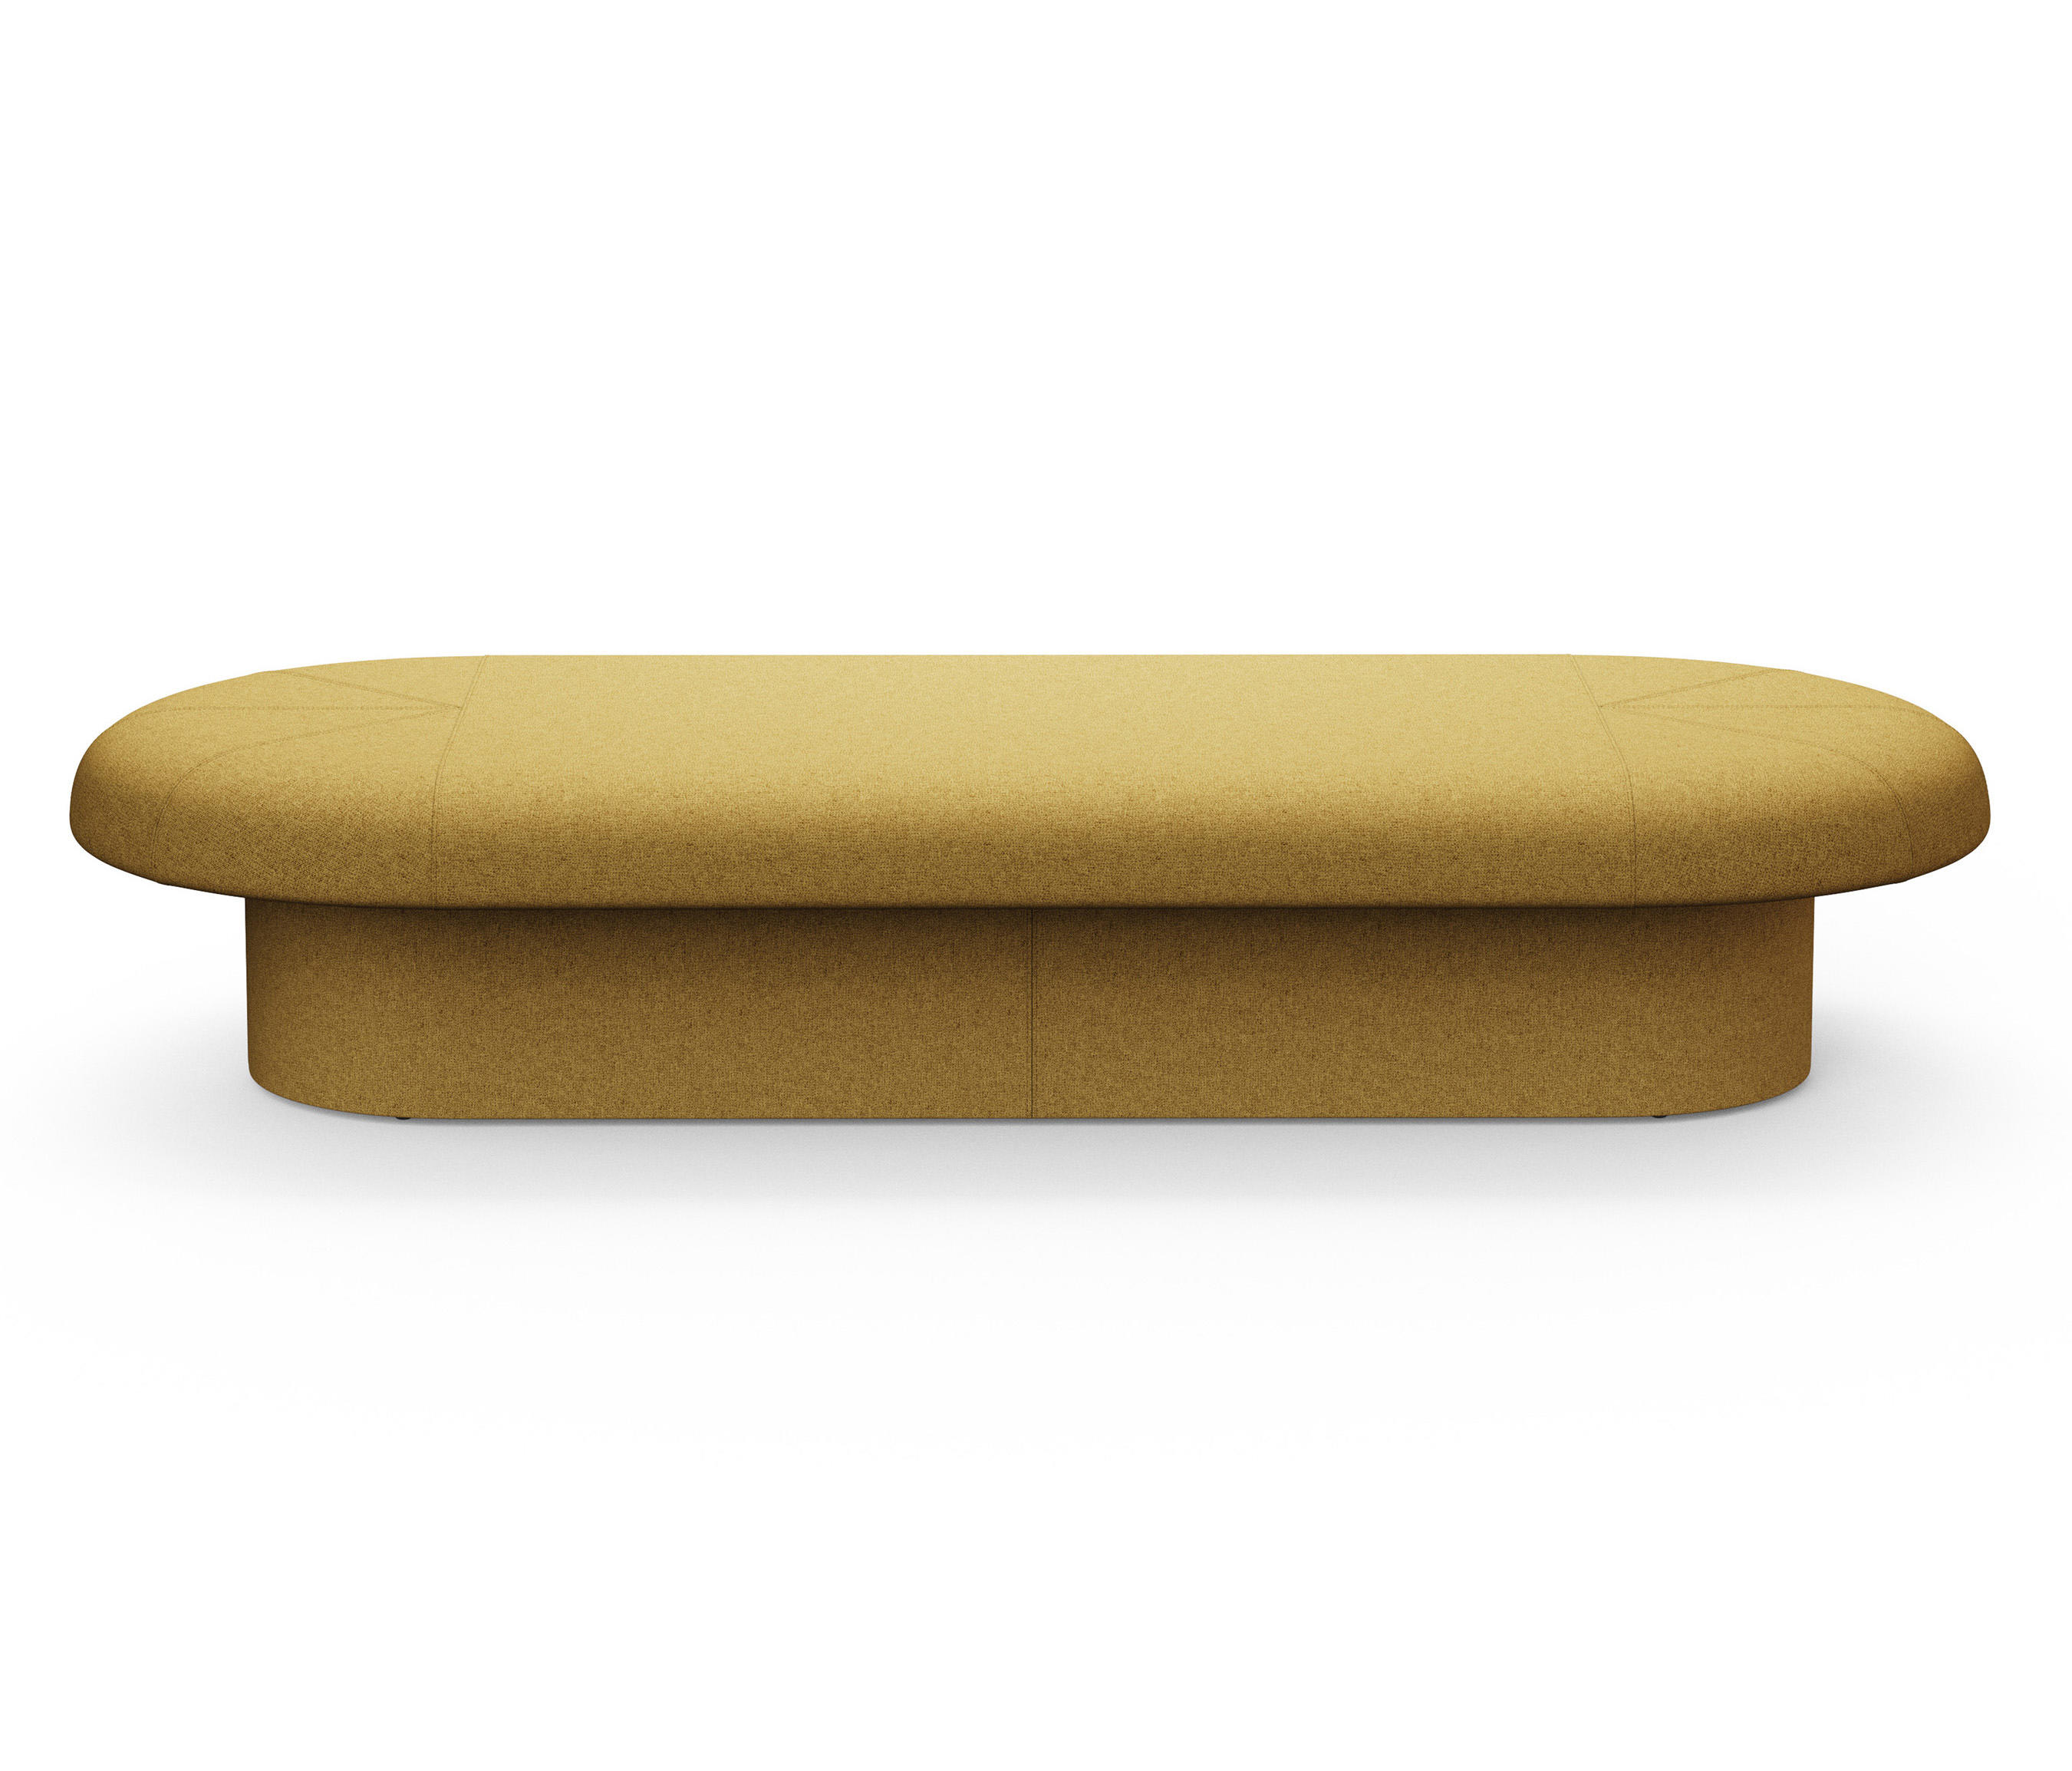 | Architonic from B&T Design DRAGE Seating - BENCH islands